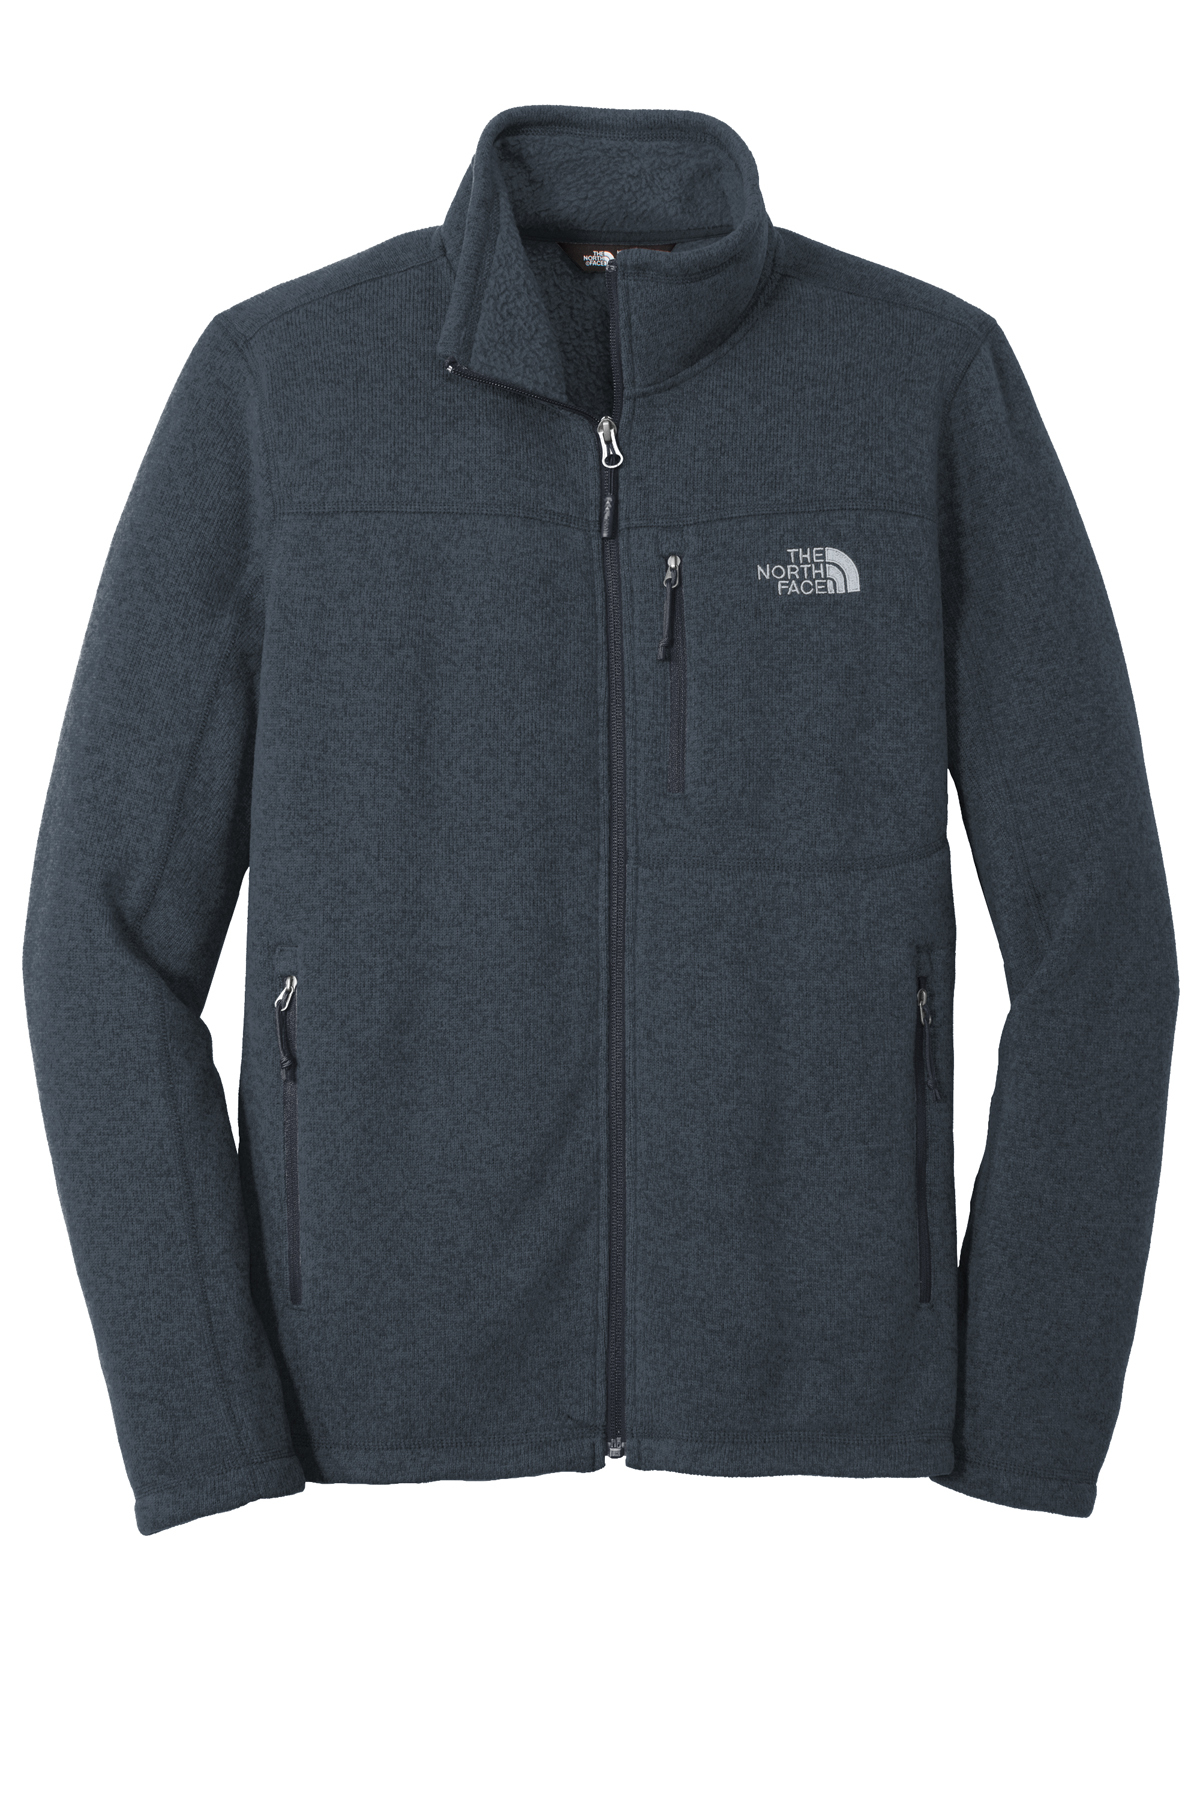 The North Face ® Sweater Fleece Jacket